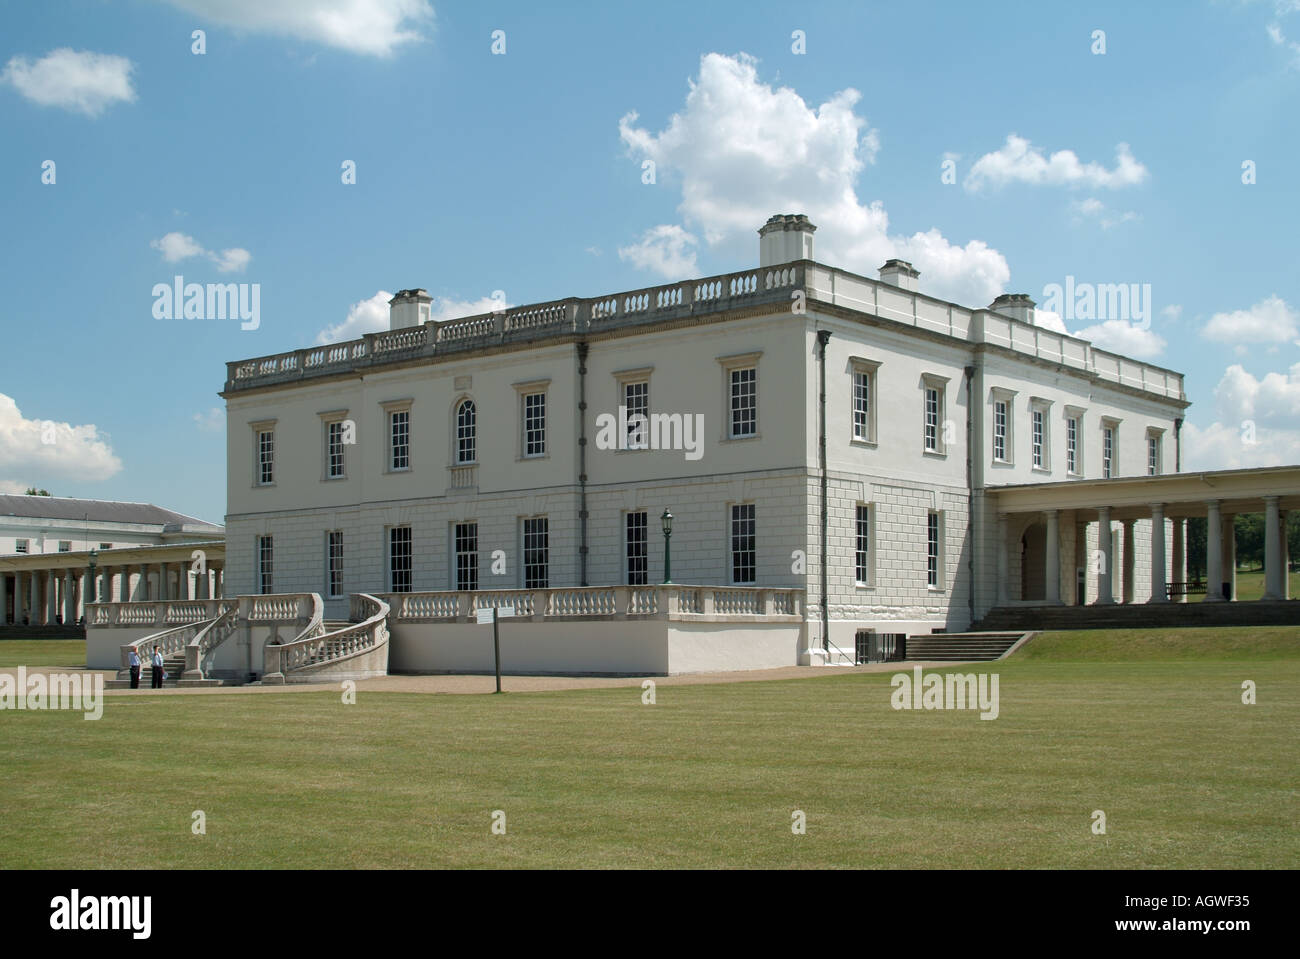 Historical famous Queen's House Inigo Jones' masterpiece & first Classical building in UK part of Royal Museums in Greenwich Park London England UK Stock Photo